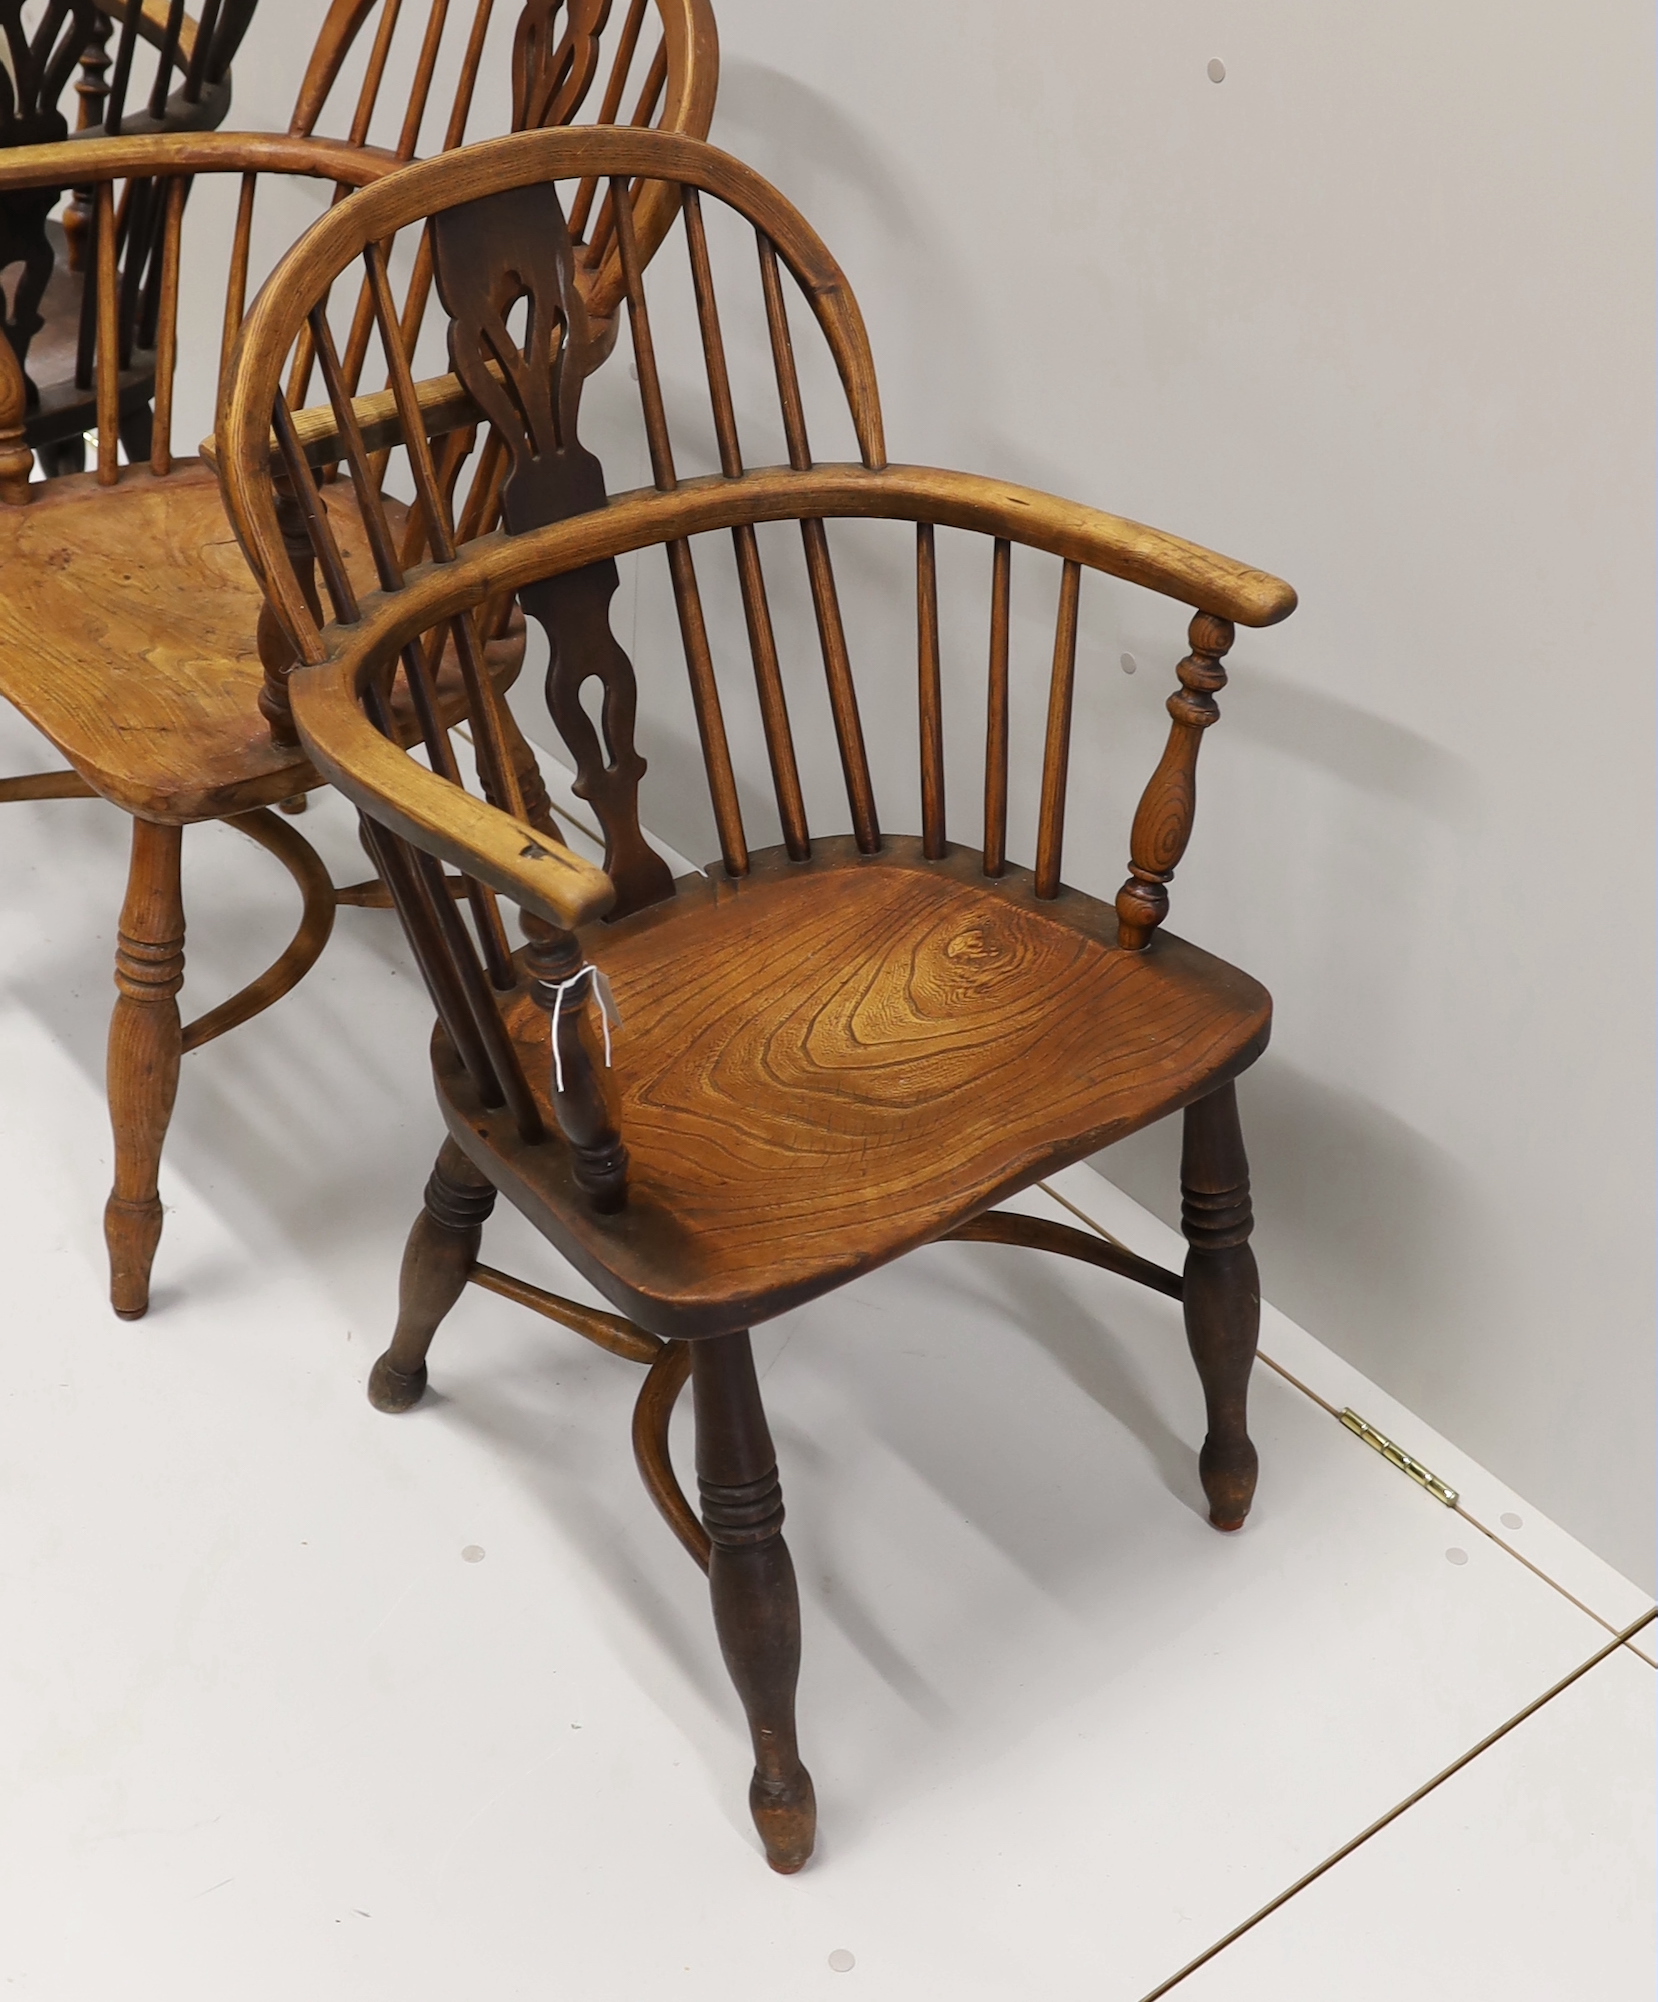 Three 19th century Nottingham area Windsor ash and elm elbow chairs with crinoline stretchers, largest width 55cm, depth 39cm, height 95cm